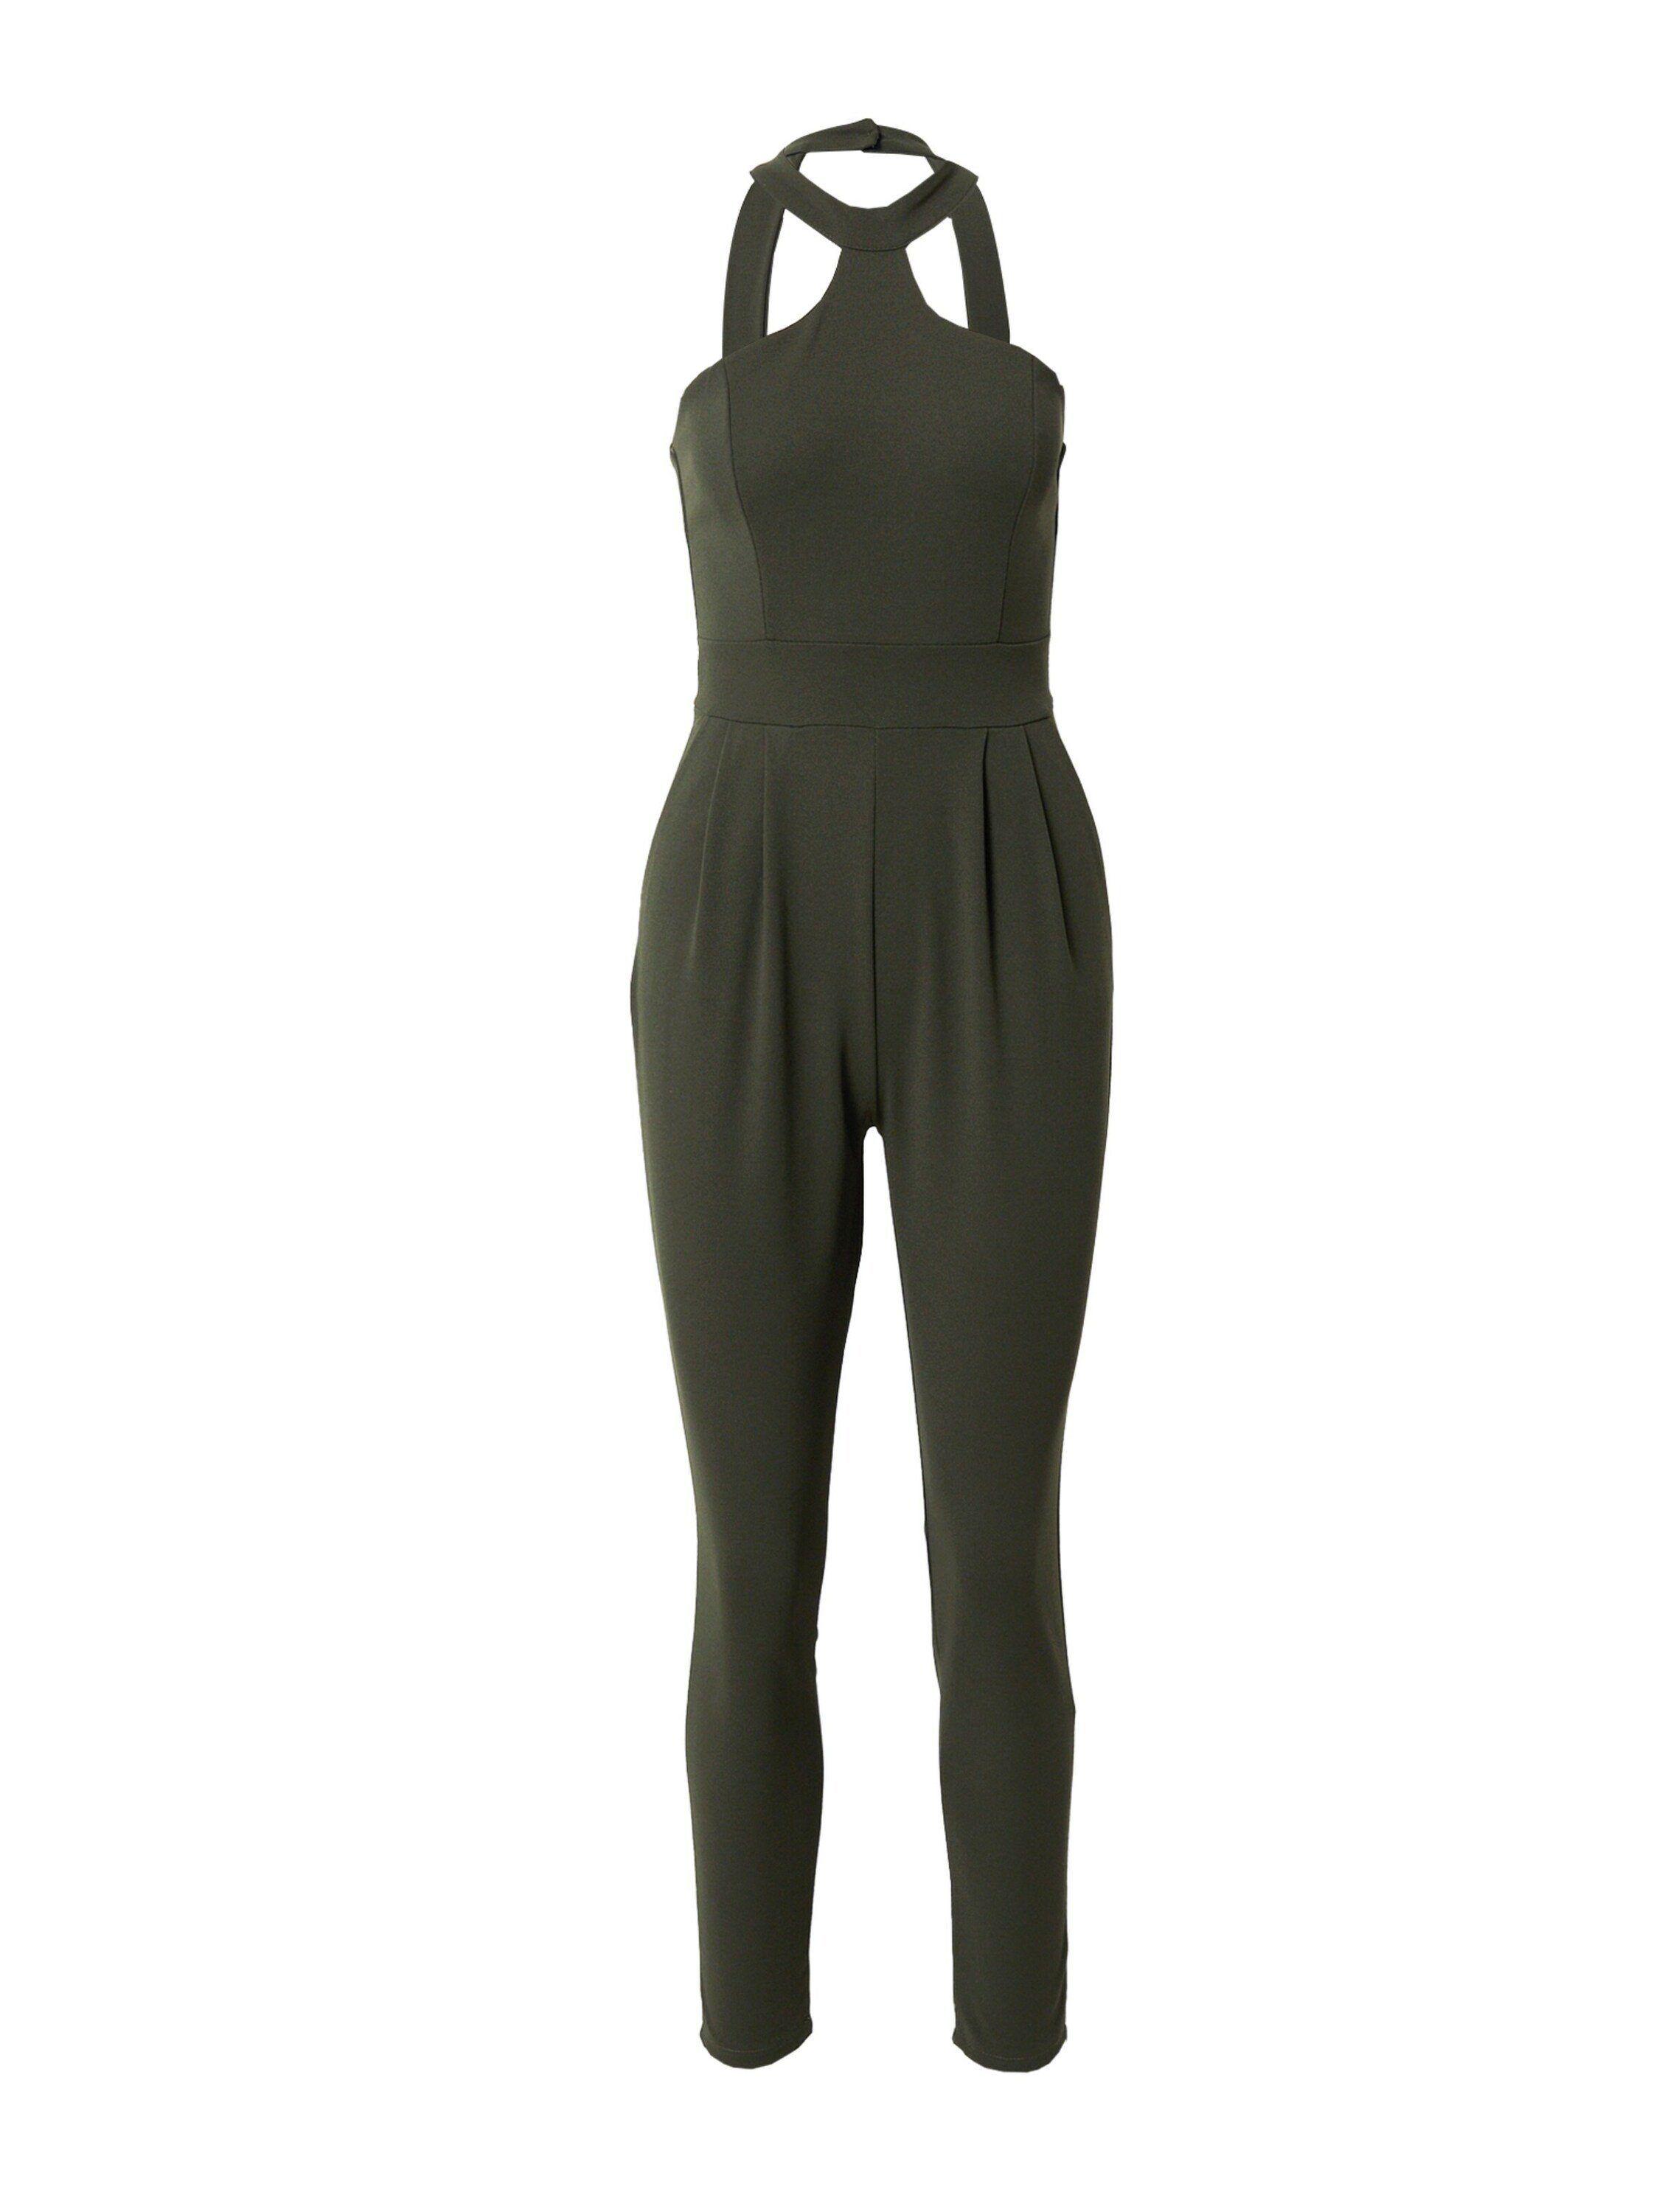 Wal G Overall & Jumpsuit online kaufen | OTTO